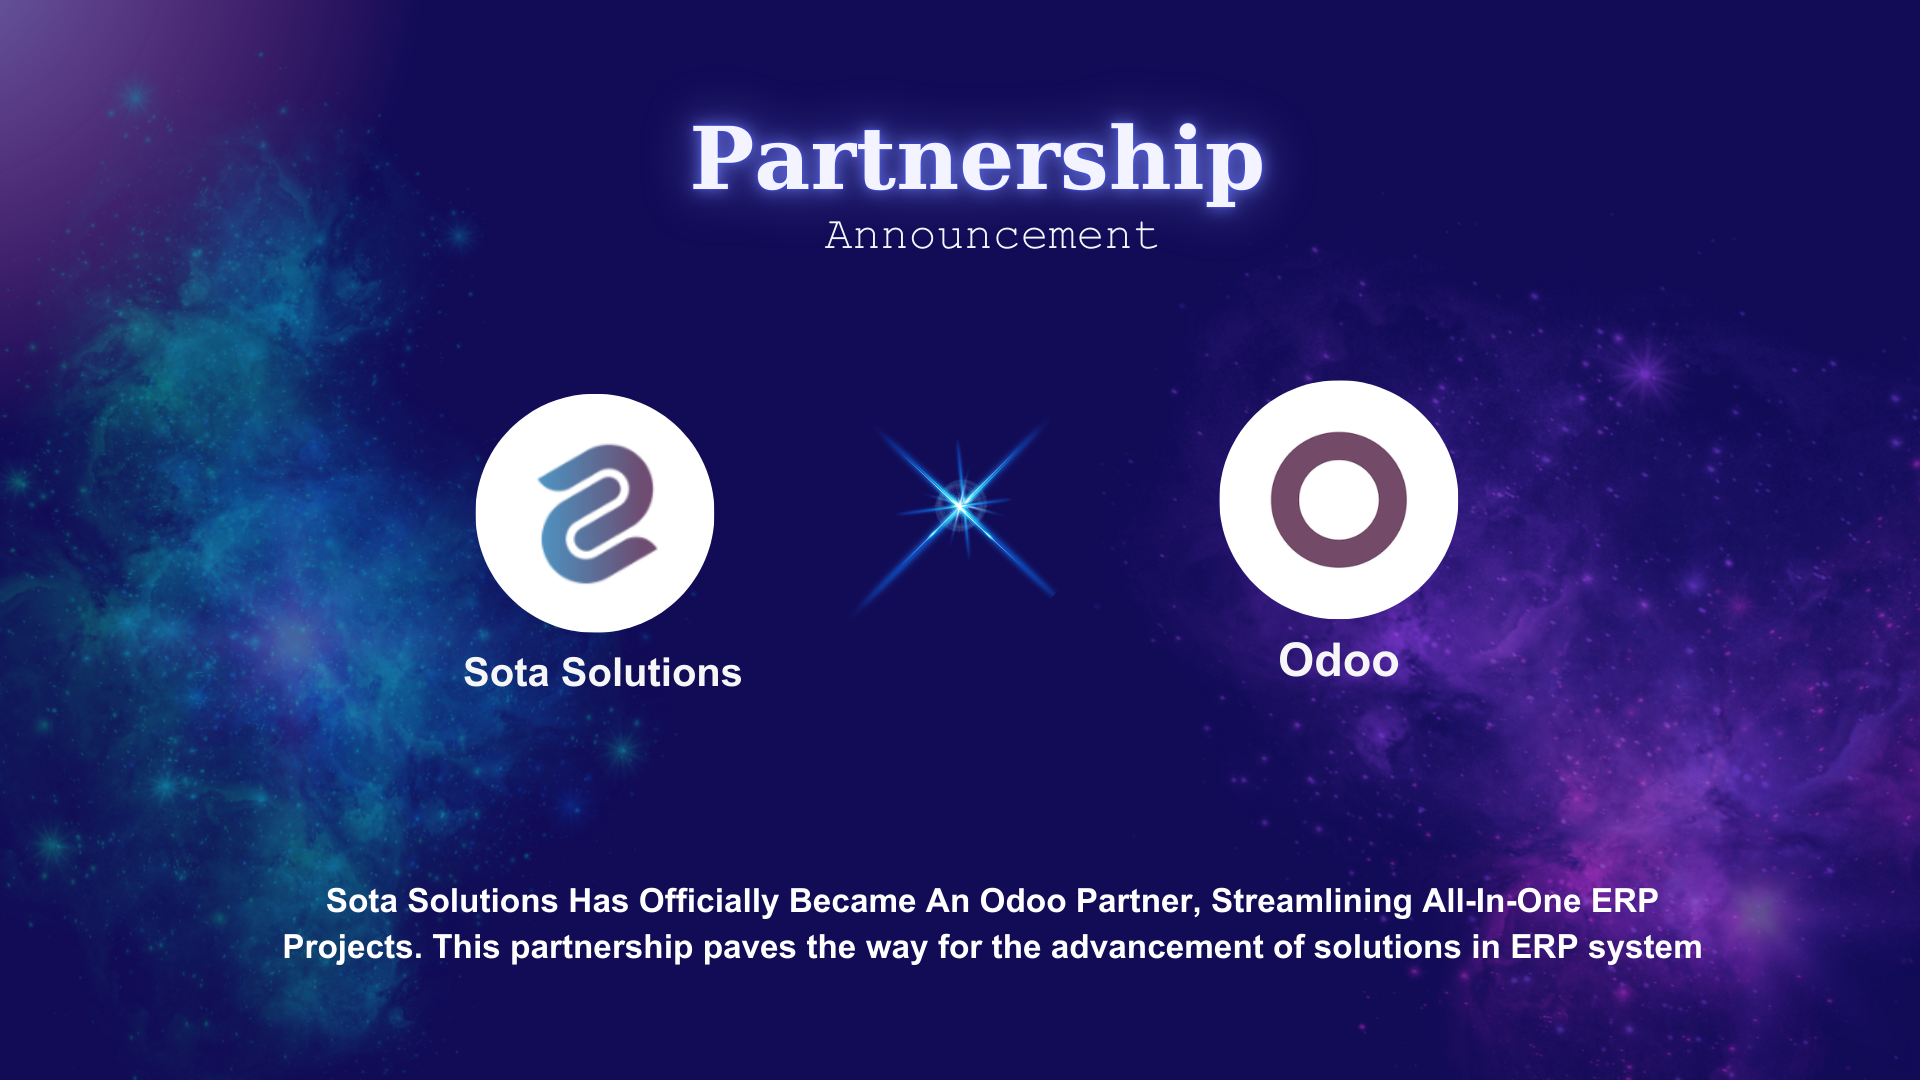 Sota Solutions partnership with Odoo